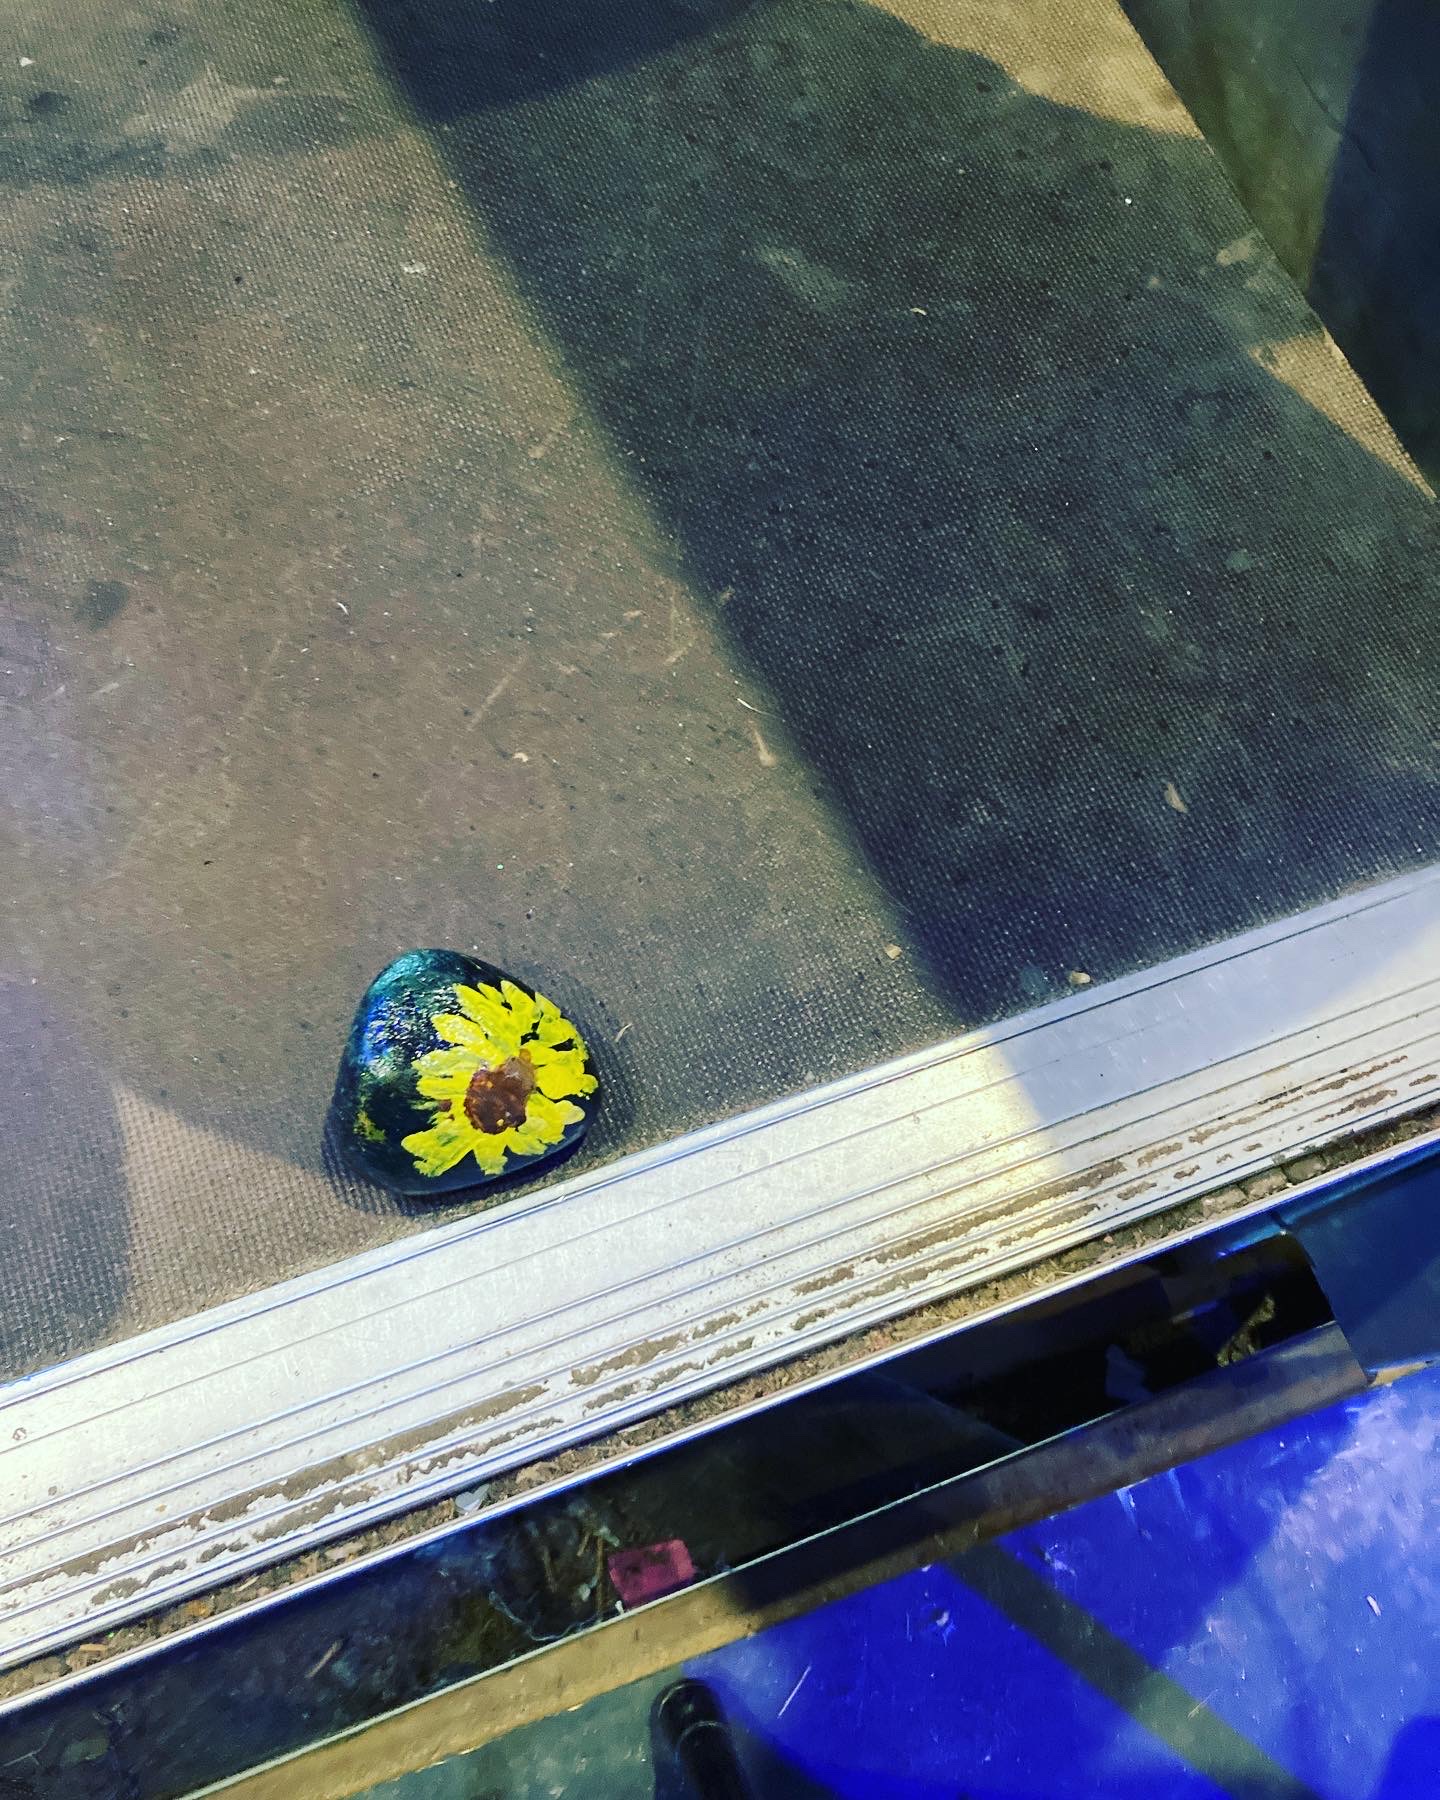 A handpainted rock, featuring a bright yellow sunflower with a dotted black and brown centre, is tucked into a corner in front of a row of seats at Bard on the Beach.